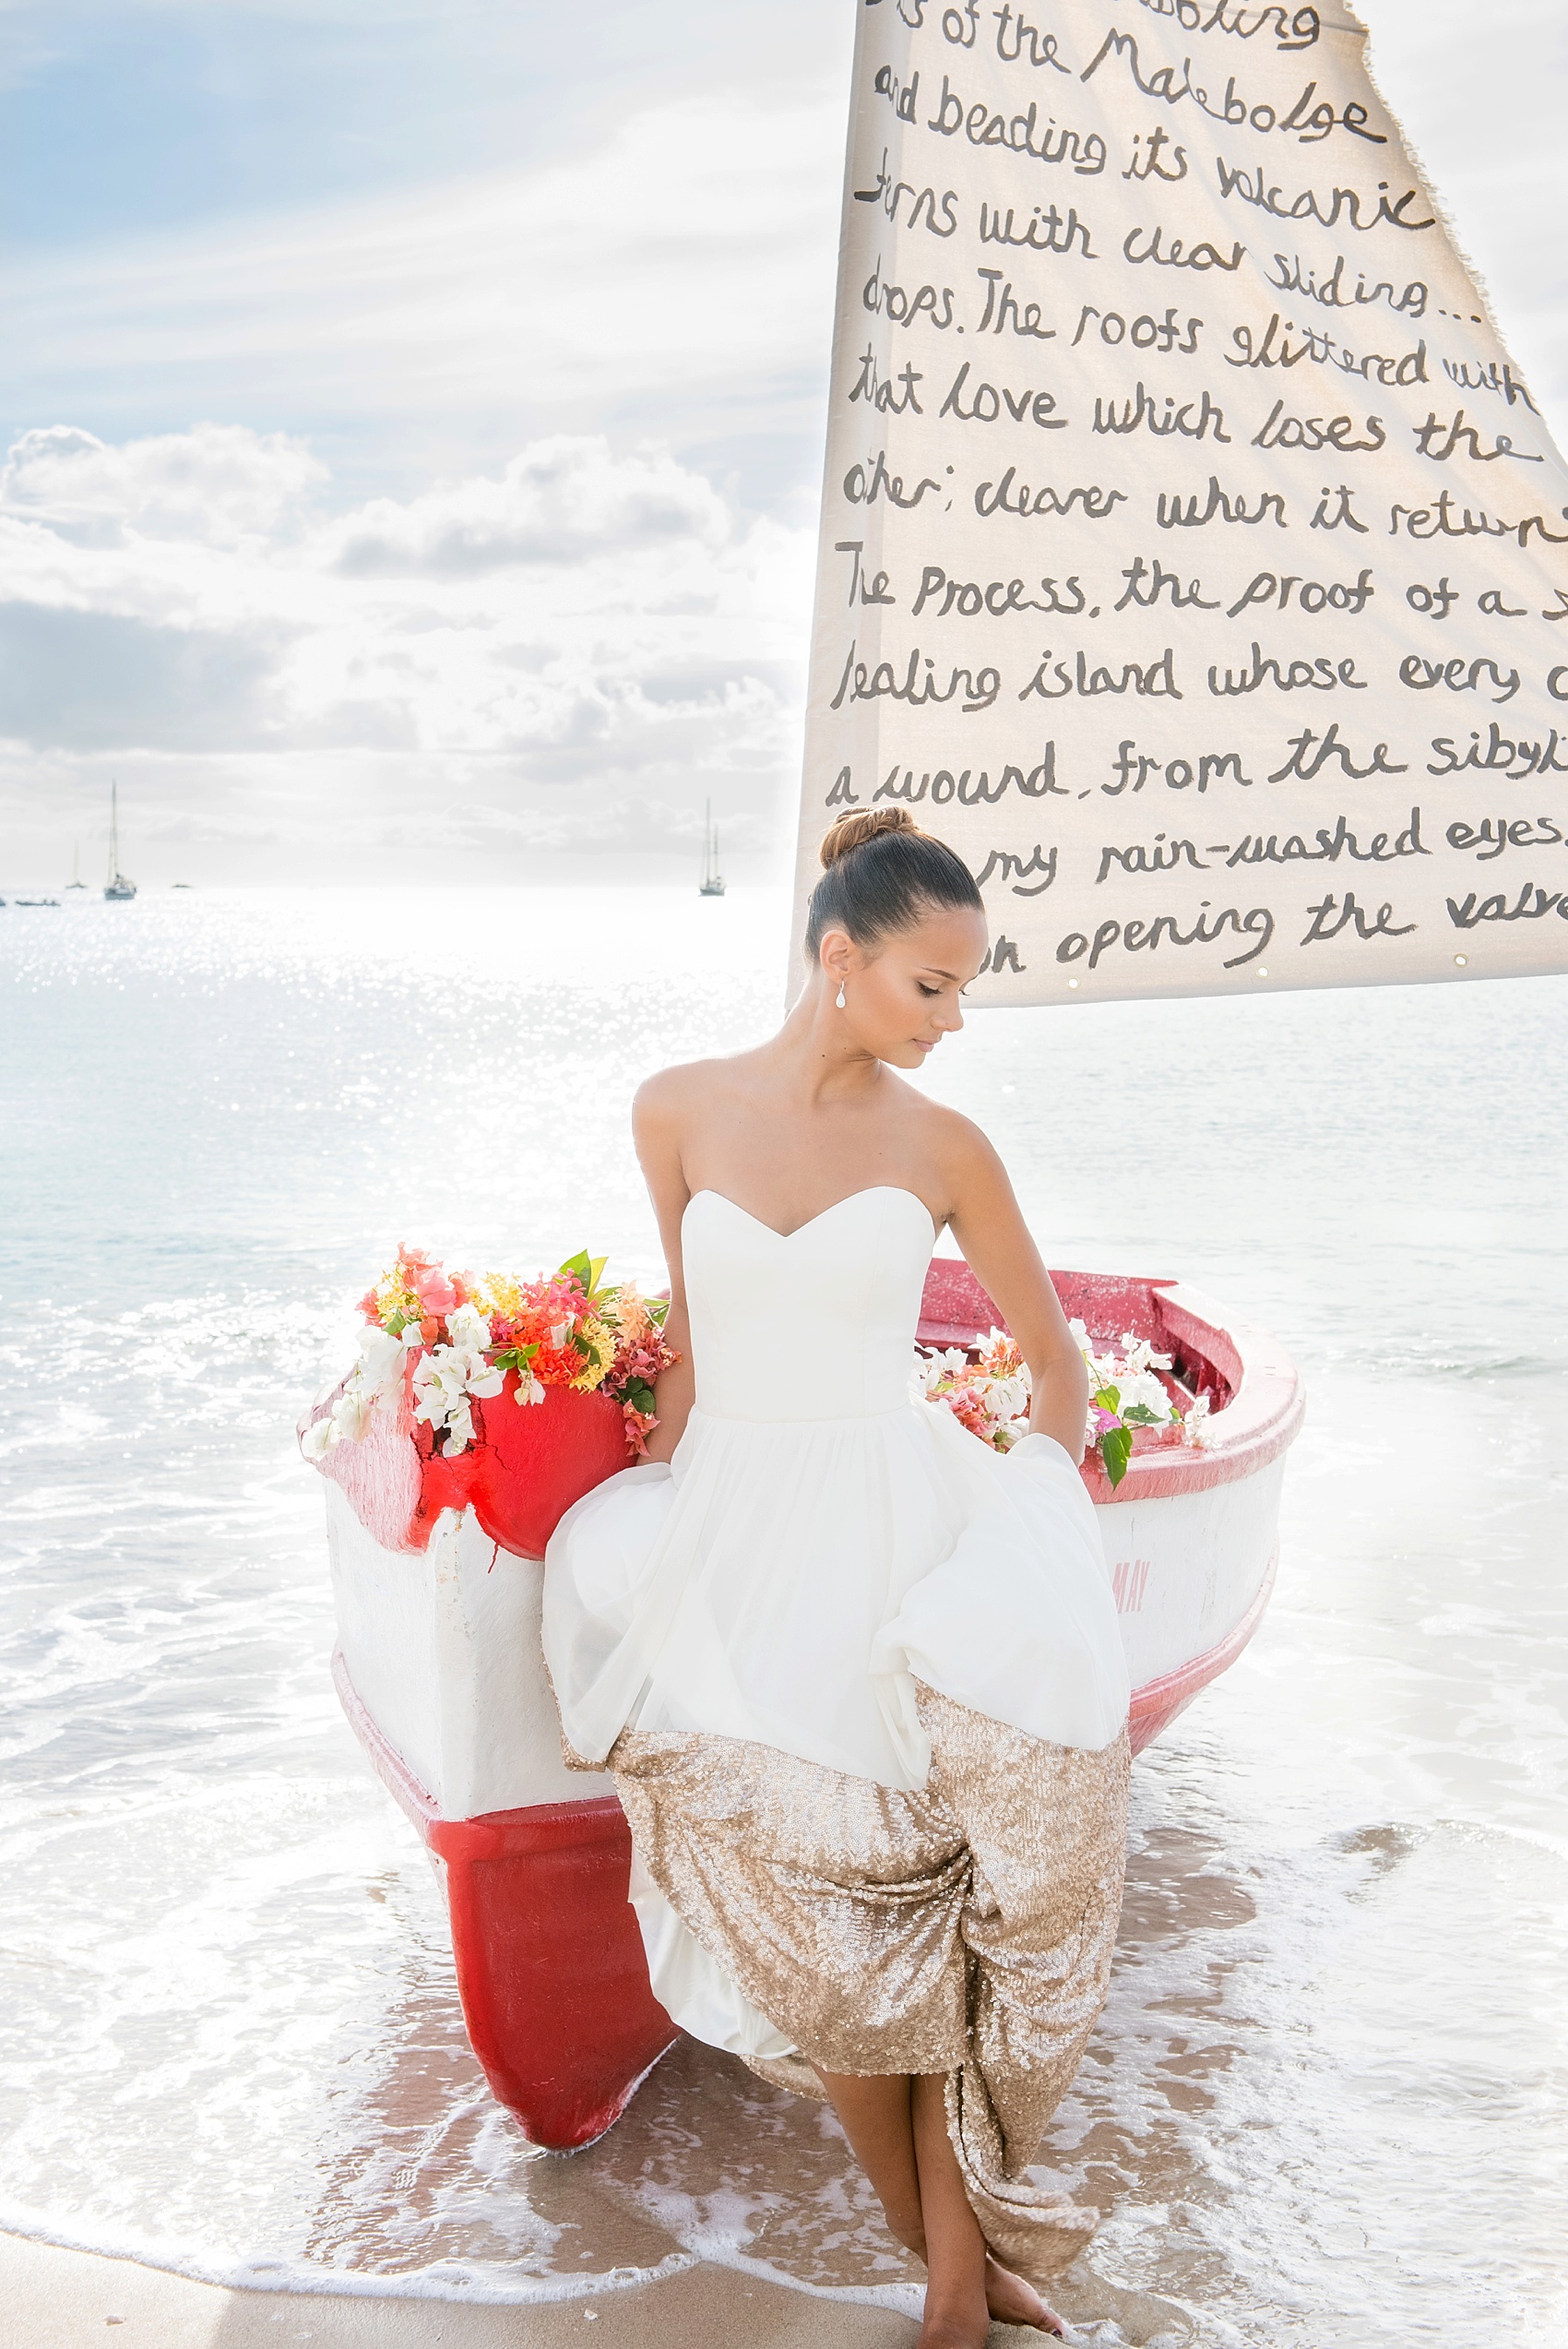 St. Lucia destination wedding beach elopement by Mikkel Paige Photography, at The Landings. Gown by Truvelle and calligraphy sail by Burnett's Boards.